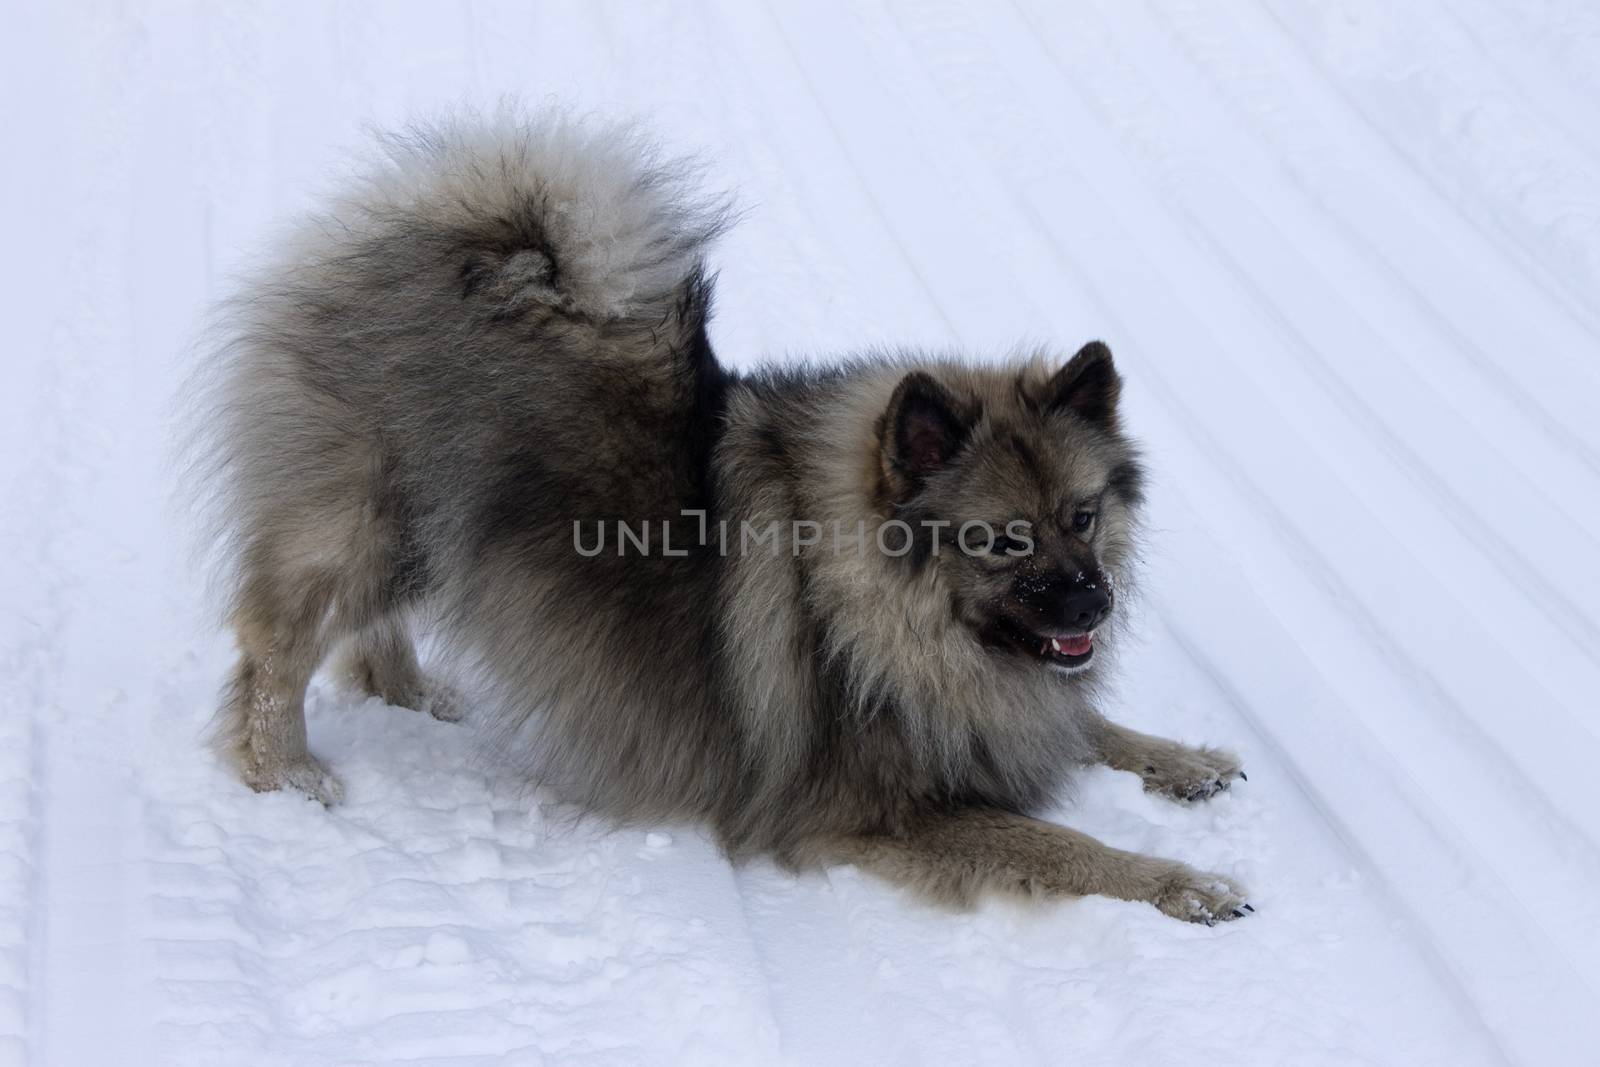 Dogs of the breed Keeshond, Wolfspitz in winter on the snow walk together